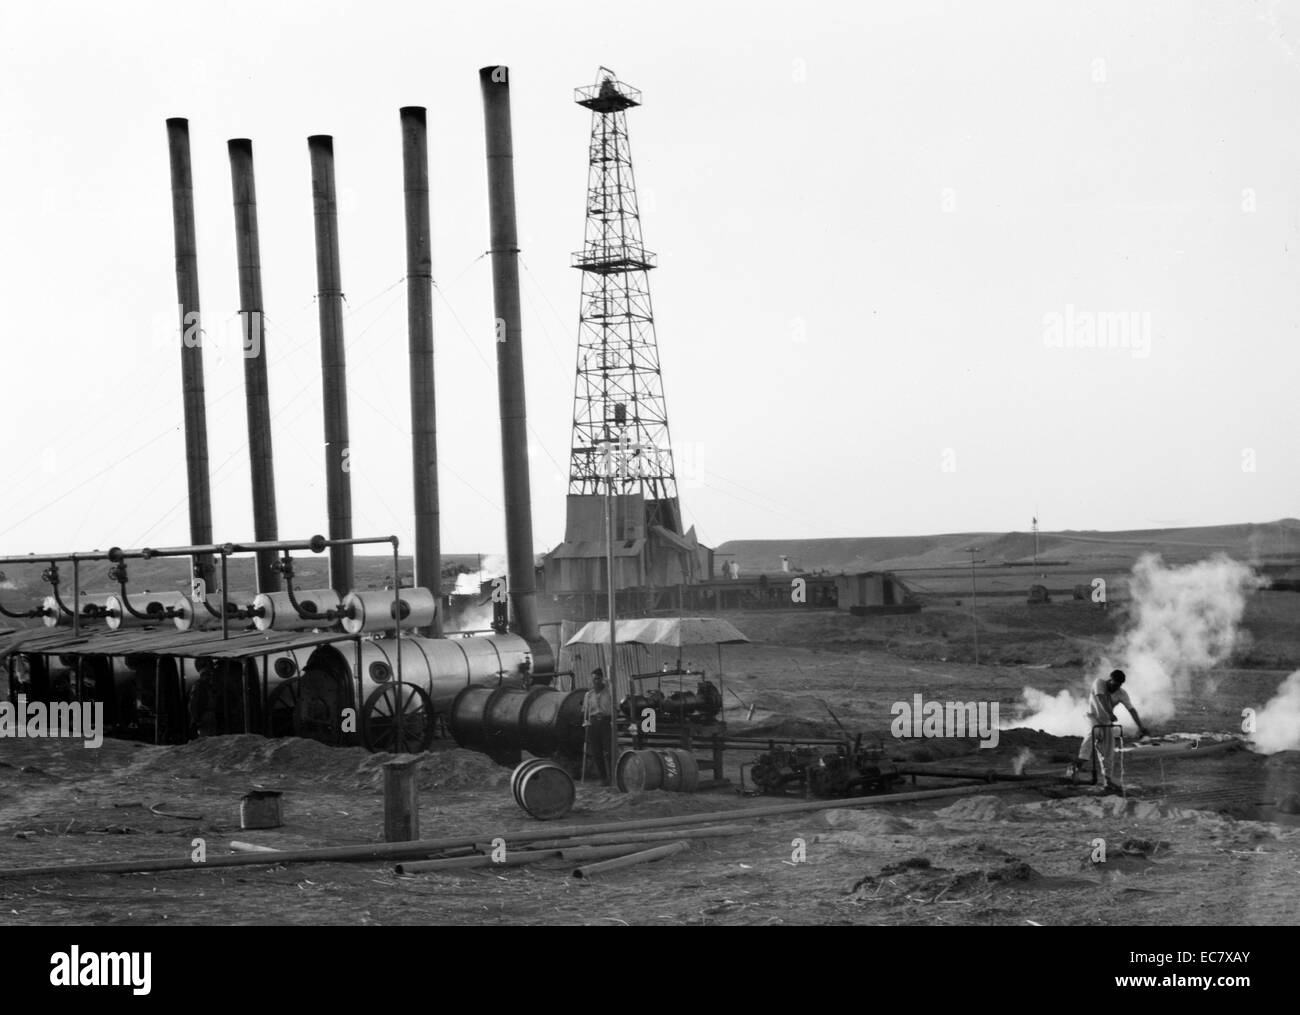 History of oil drilling Black and White Stock Photos & Images - Alamy